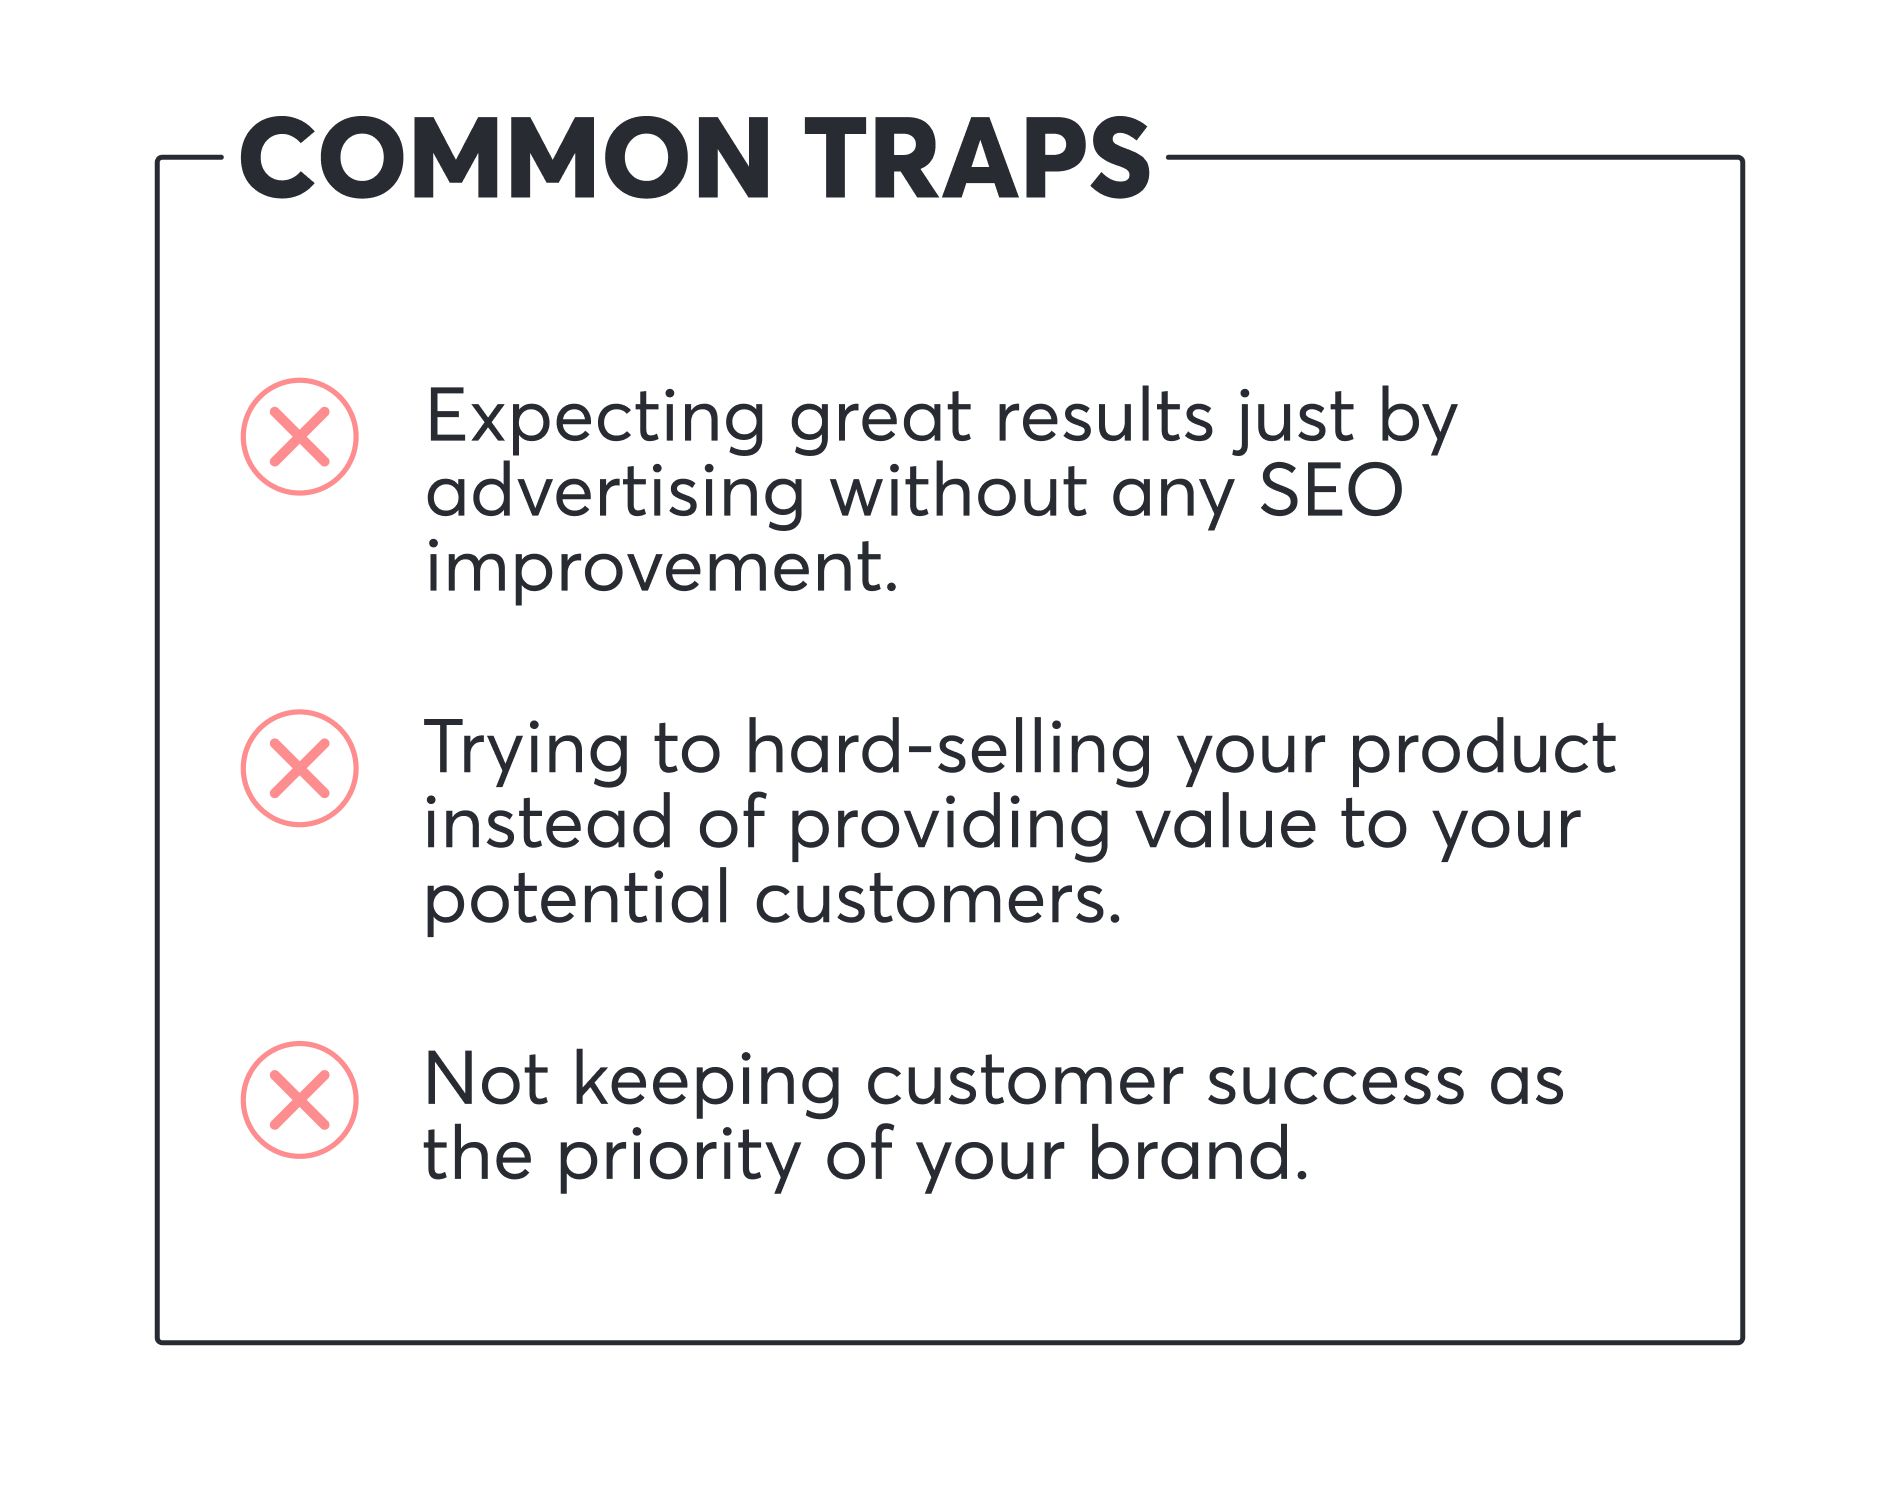 Common Traps to Optimize the Awareness Stage of the Shopify Funnel